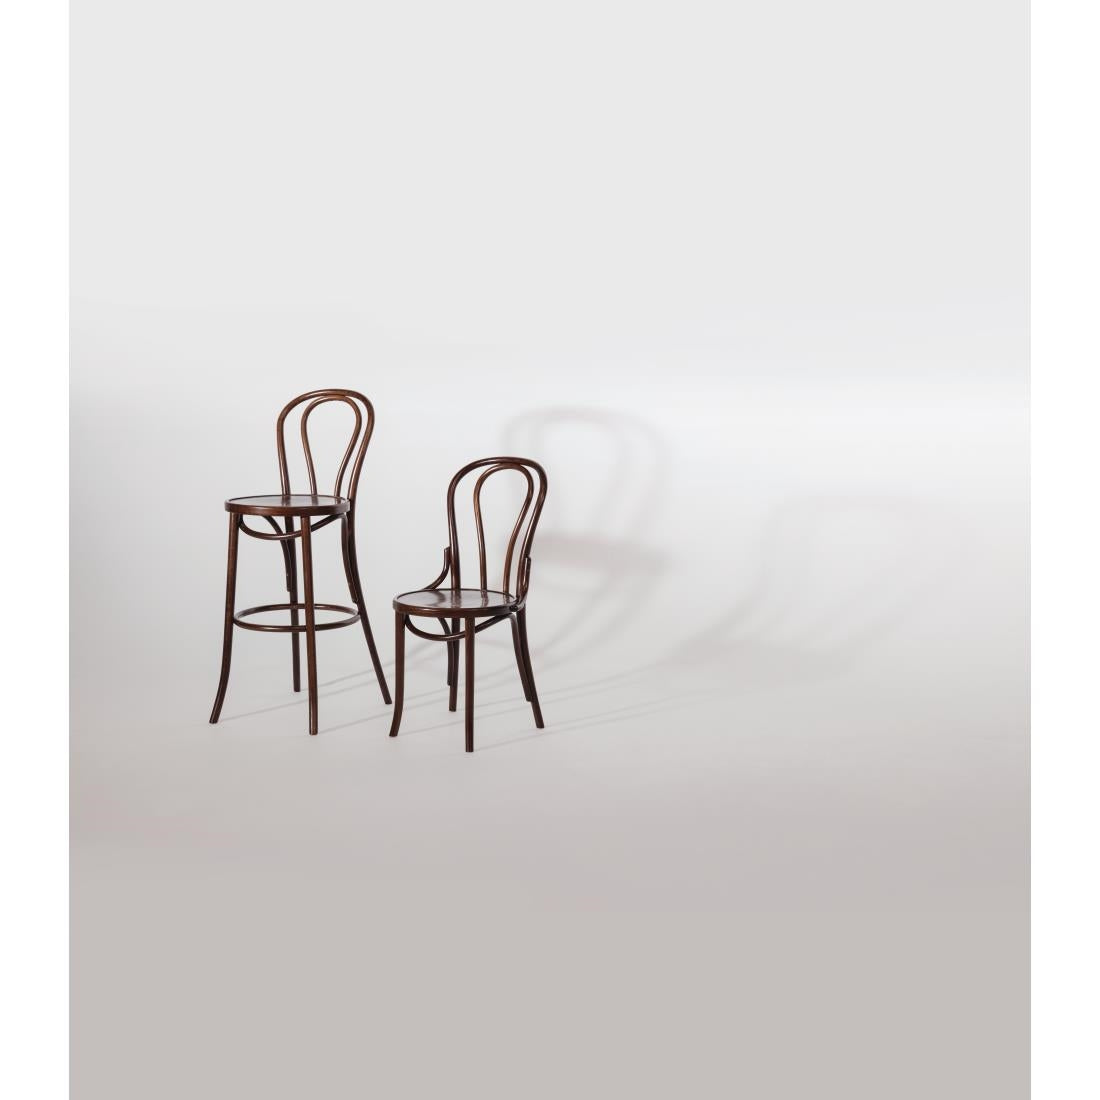 Fameg Bentwood Bistro Side Chairs Walnut Finish (Pack of 2) JD Catering Equipment Solutions Ltd